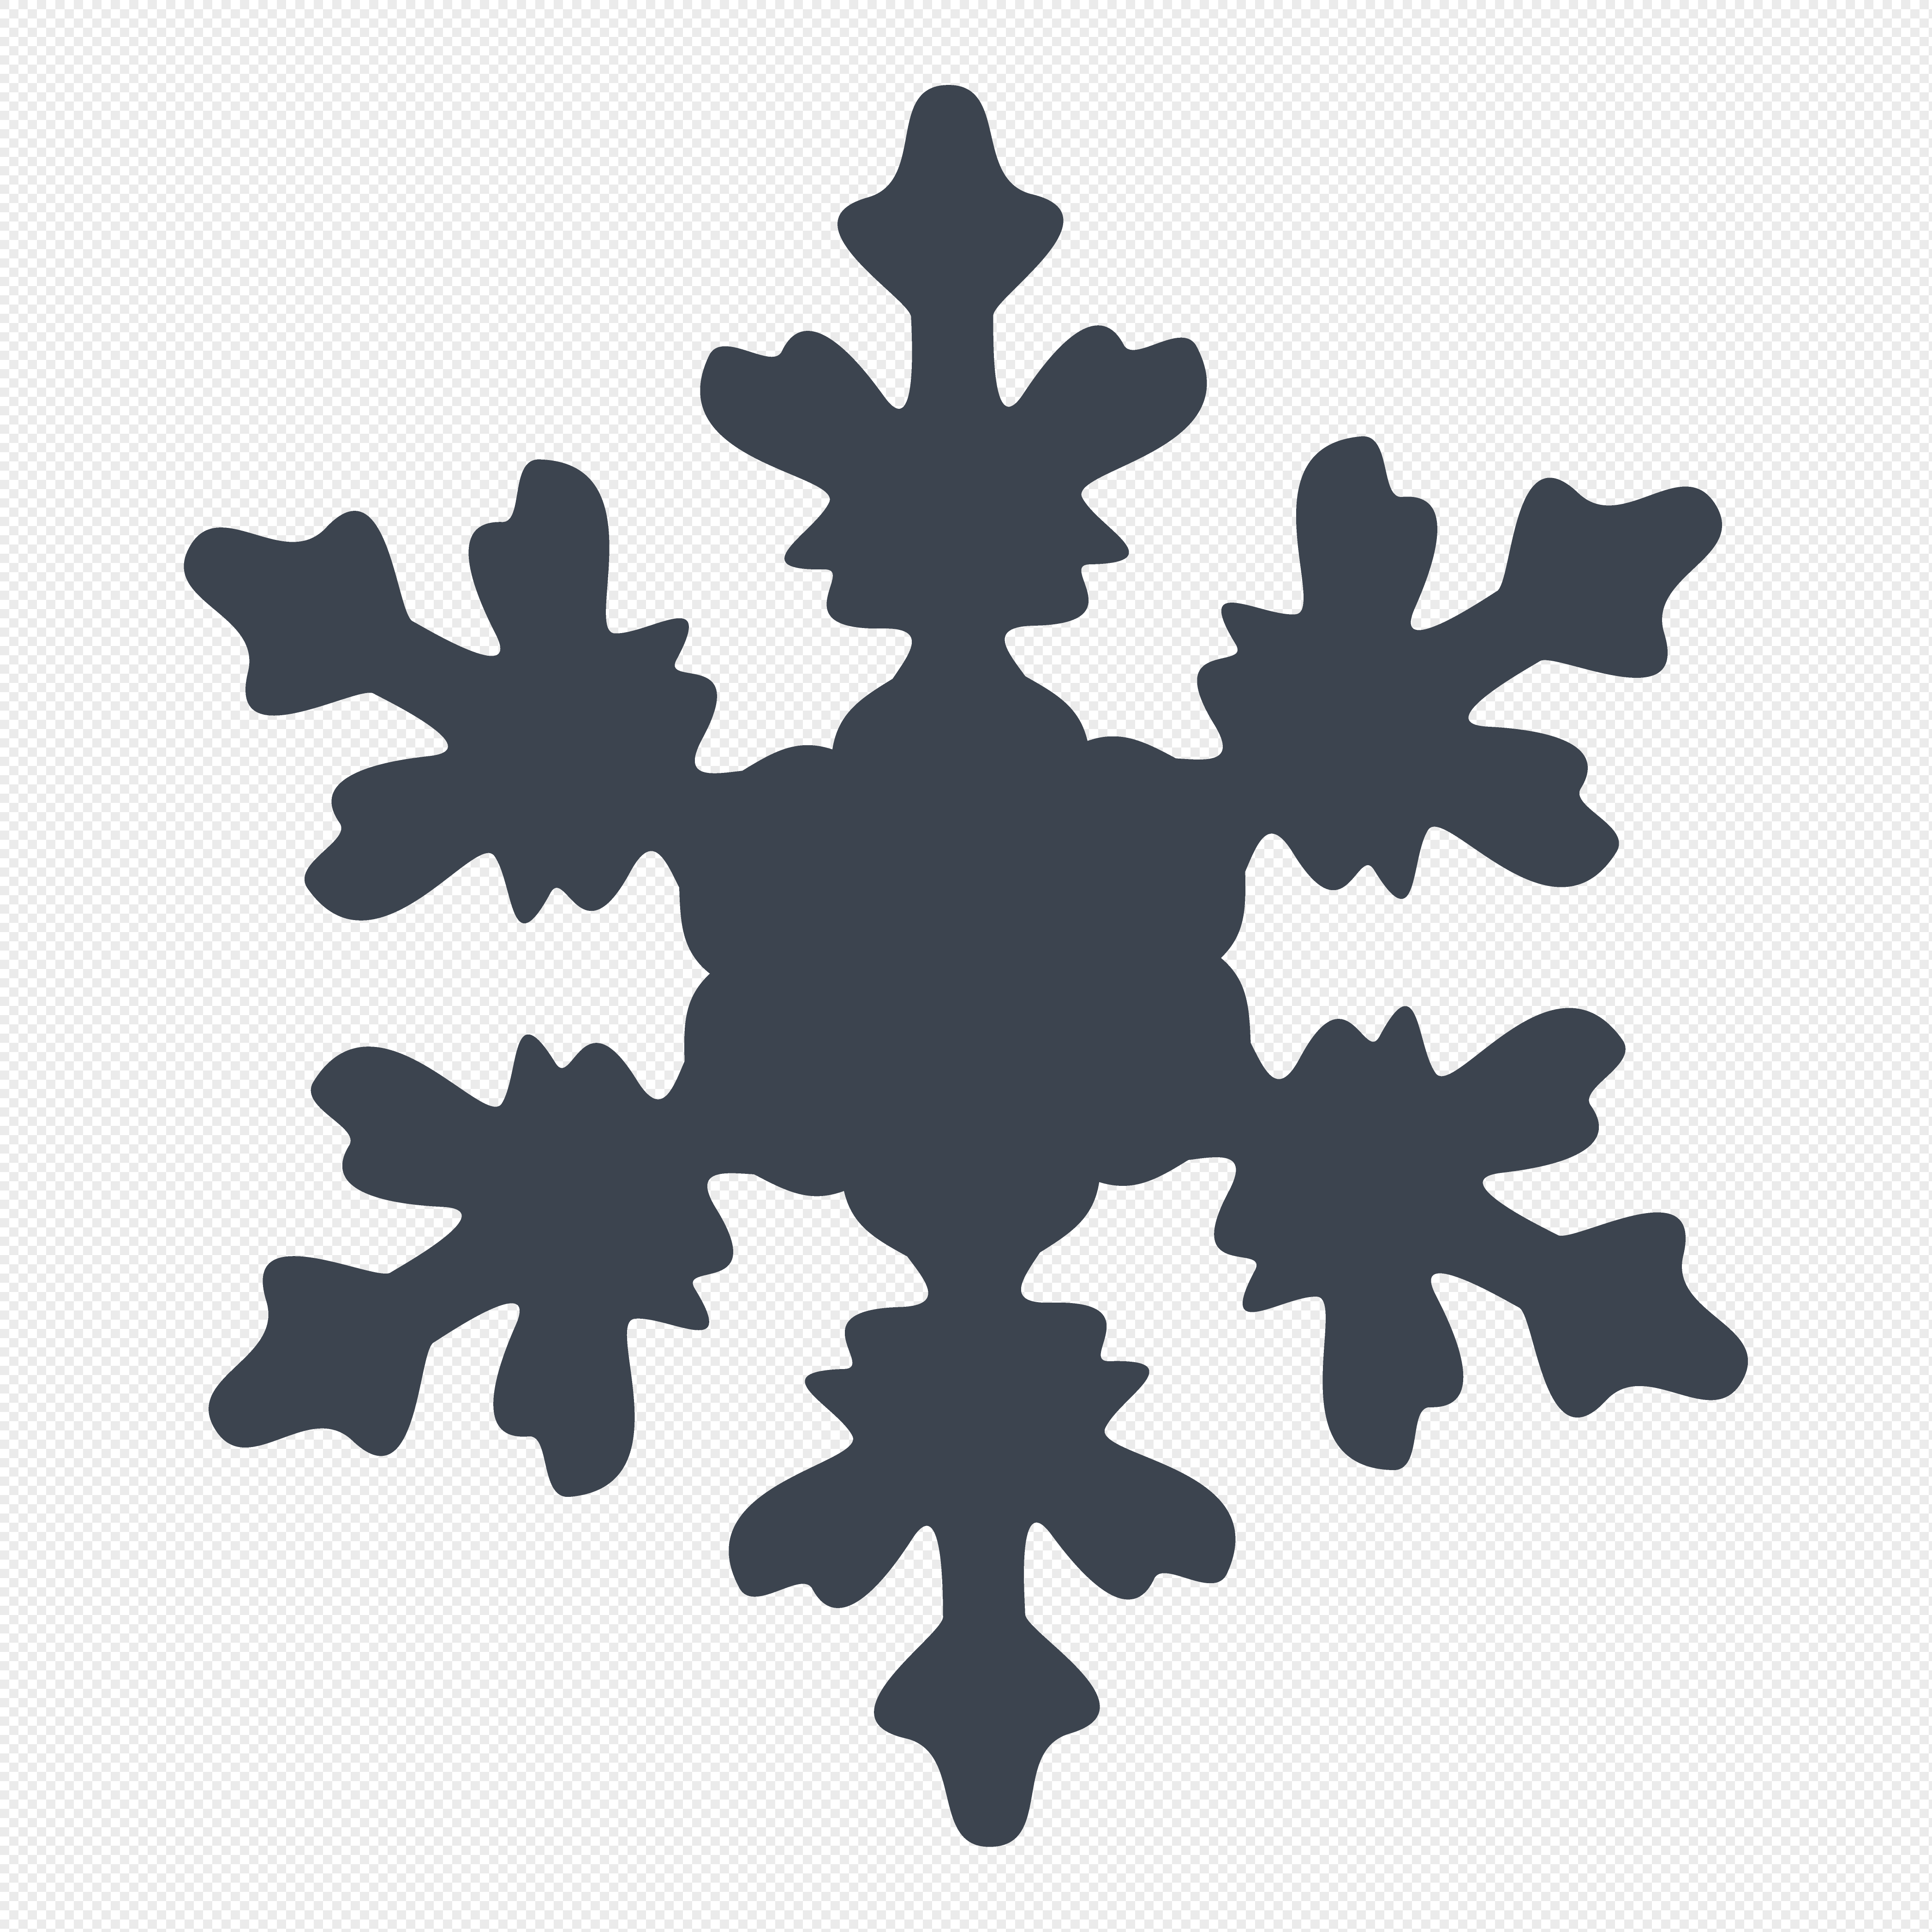 Fashion workplace snowflake vector graphics icon png image ...